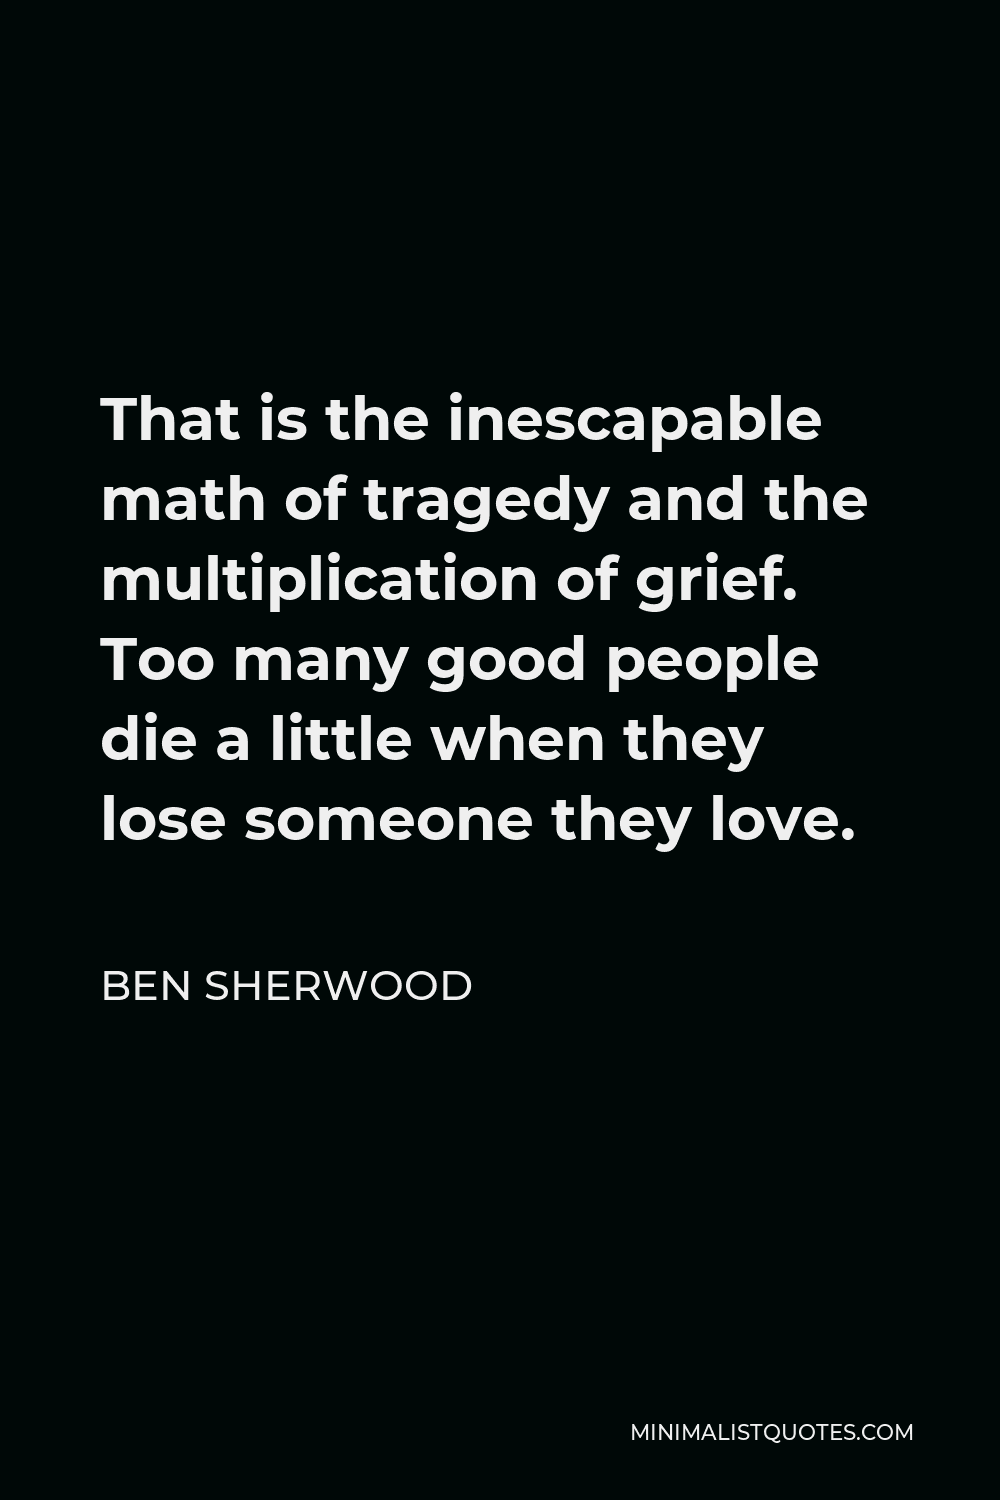 Ben Sherwood Quote - That is the inescapable math of tragedy and the multiplication of grief. Too many good people die a little when they lose someone they love.